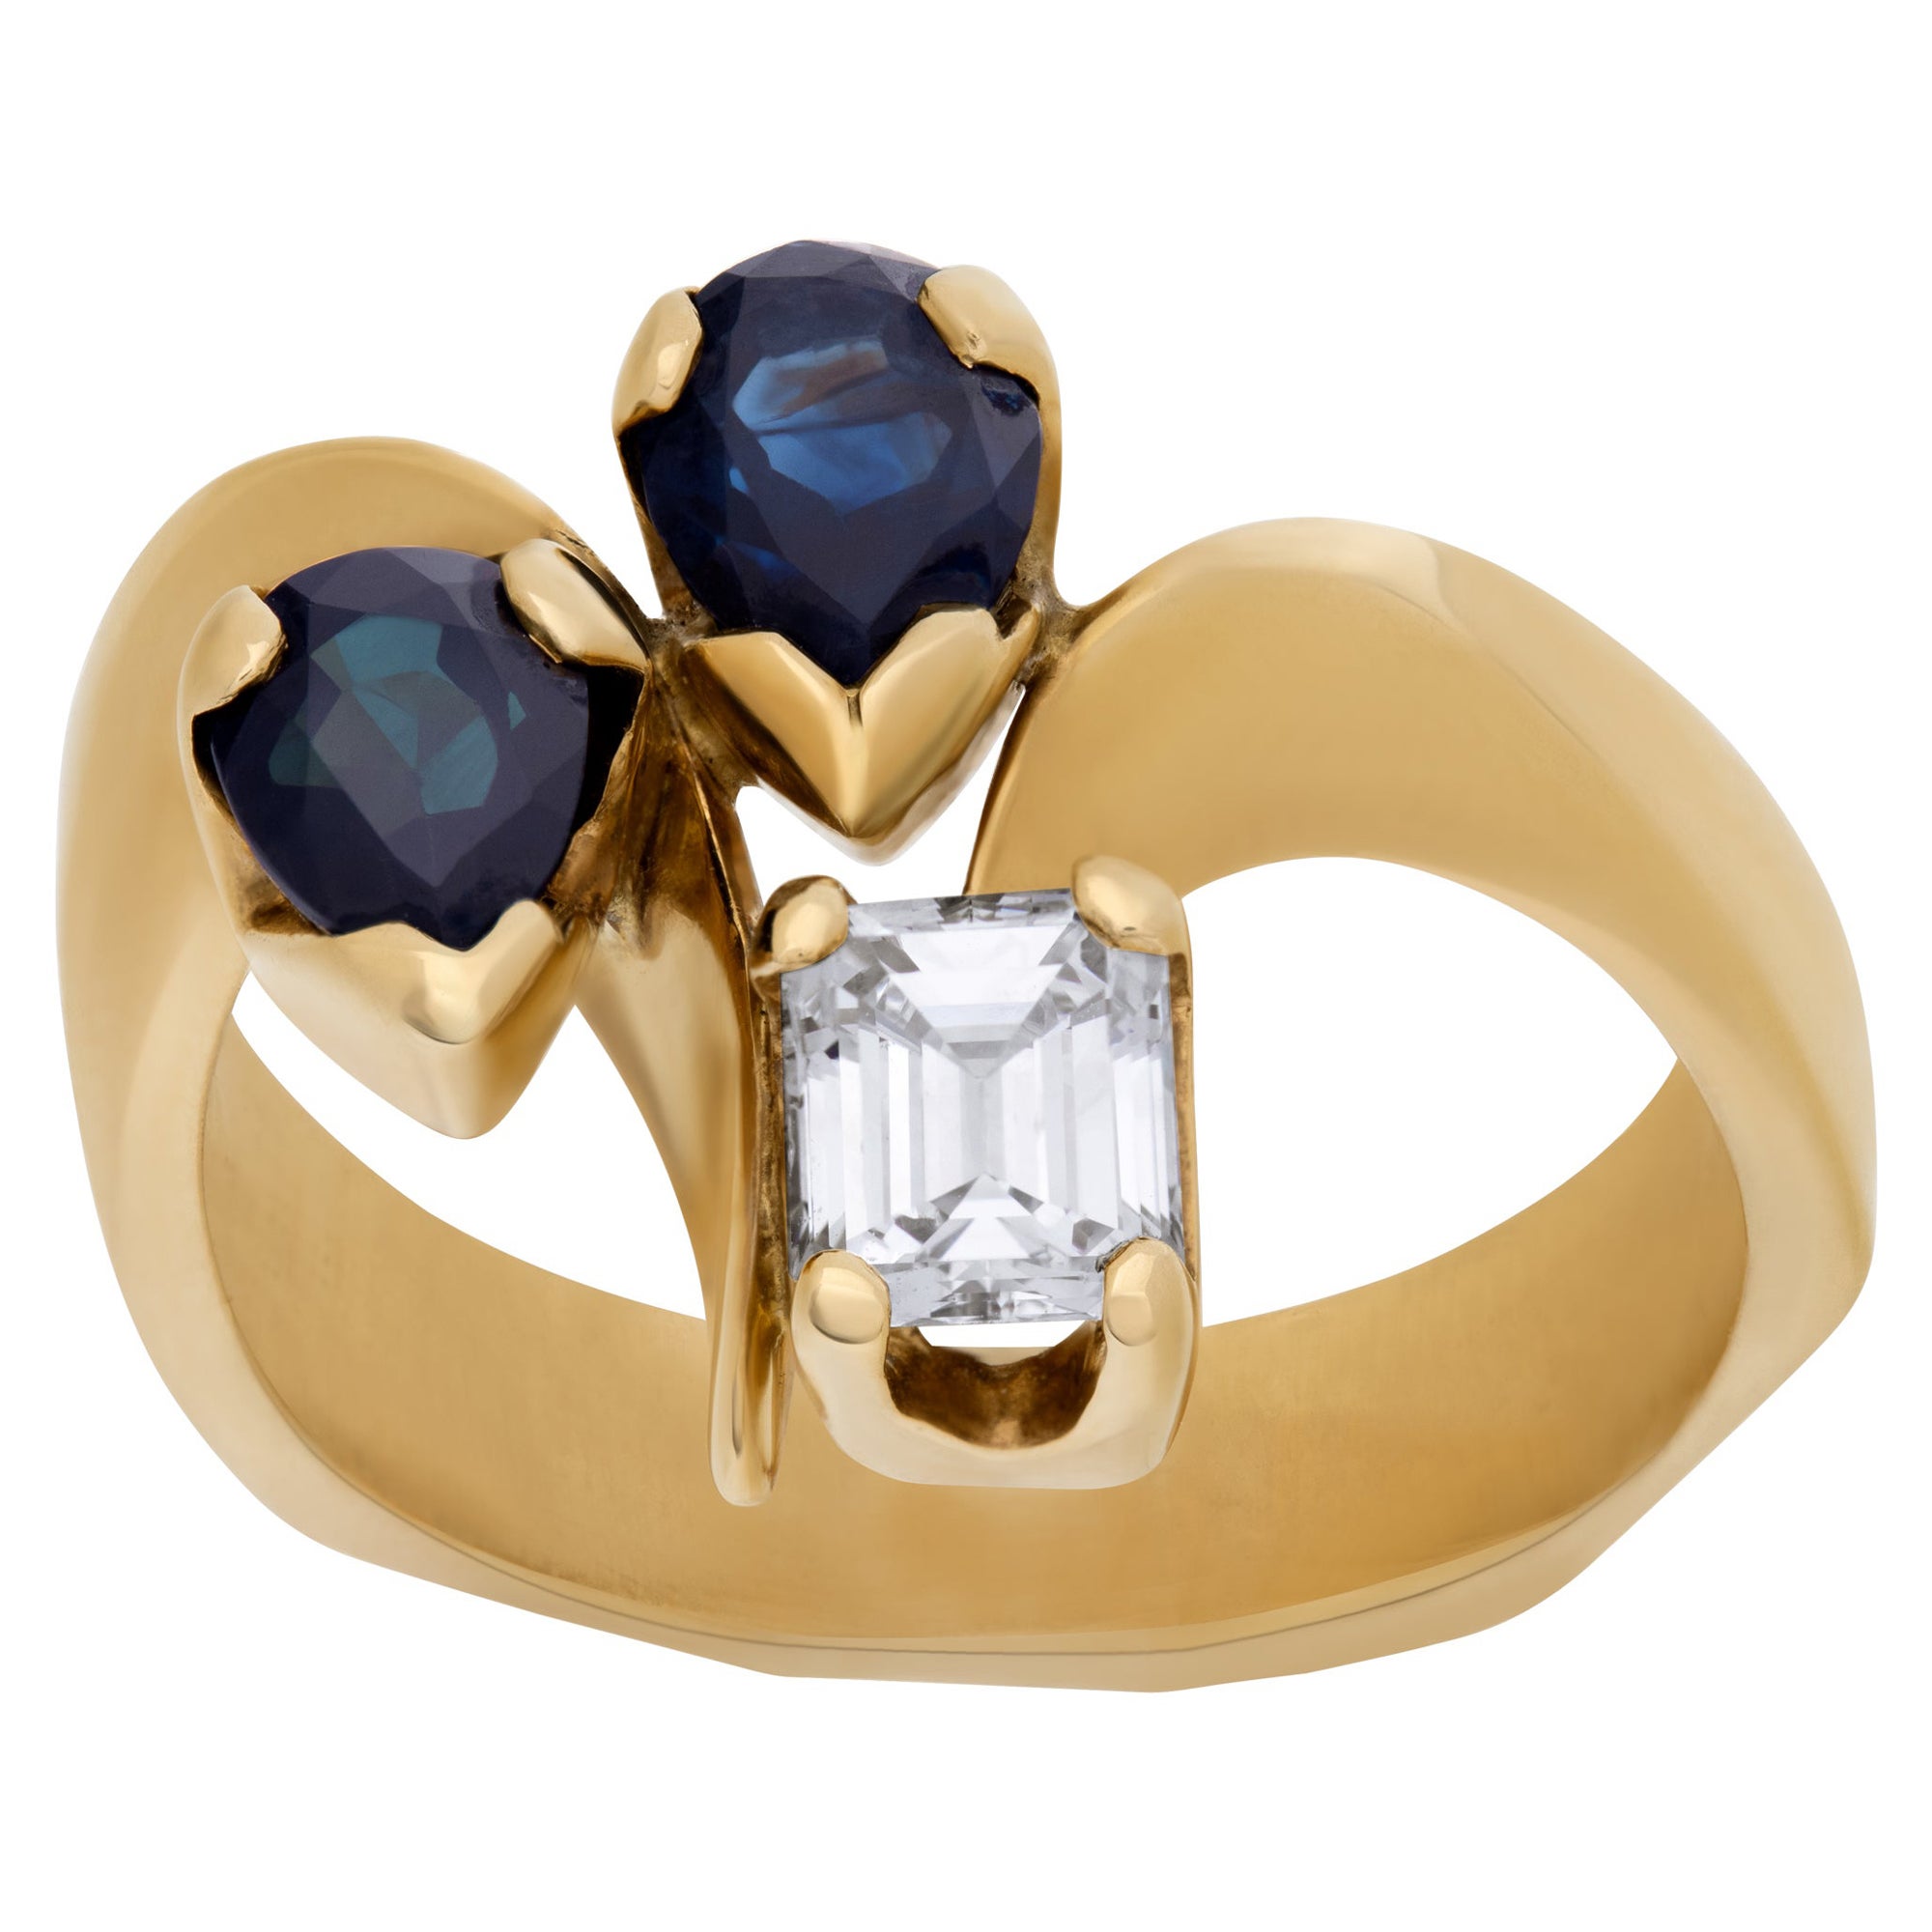 Diamond & sapphire ring in 14k yellow gold. For Sale